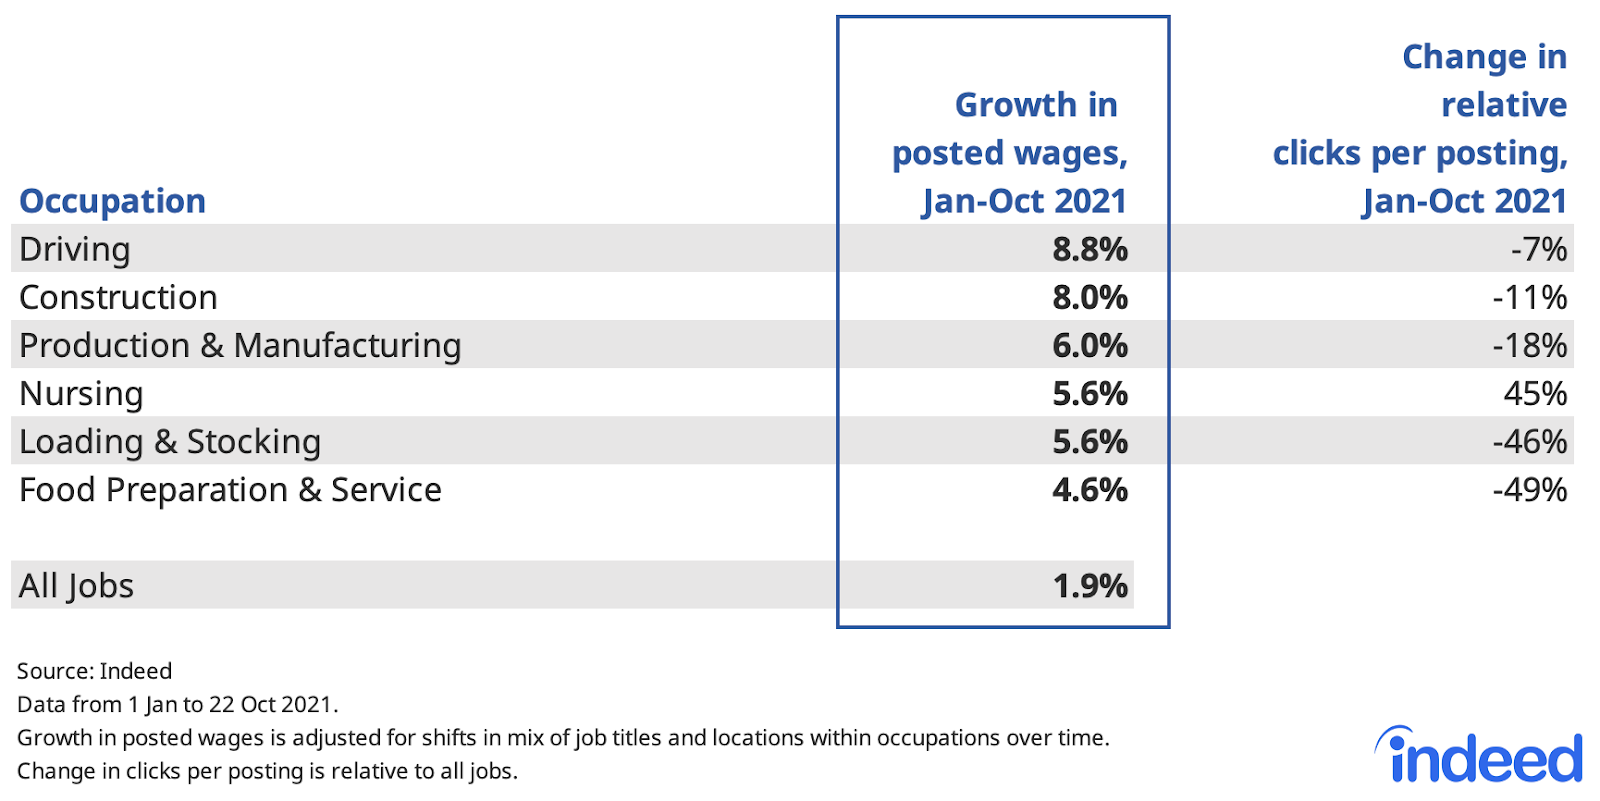 A table showing the growth in posted wages and change in relative clicks per posting between January 2021 and October 2021 for selected occupations